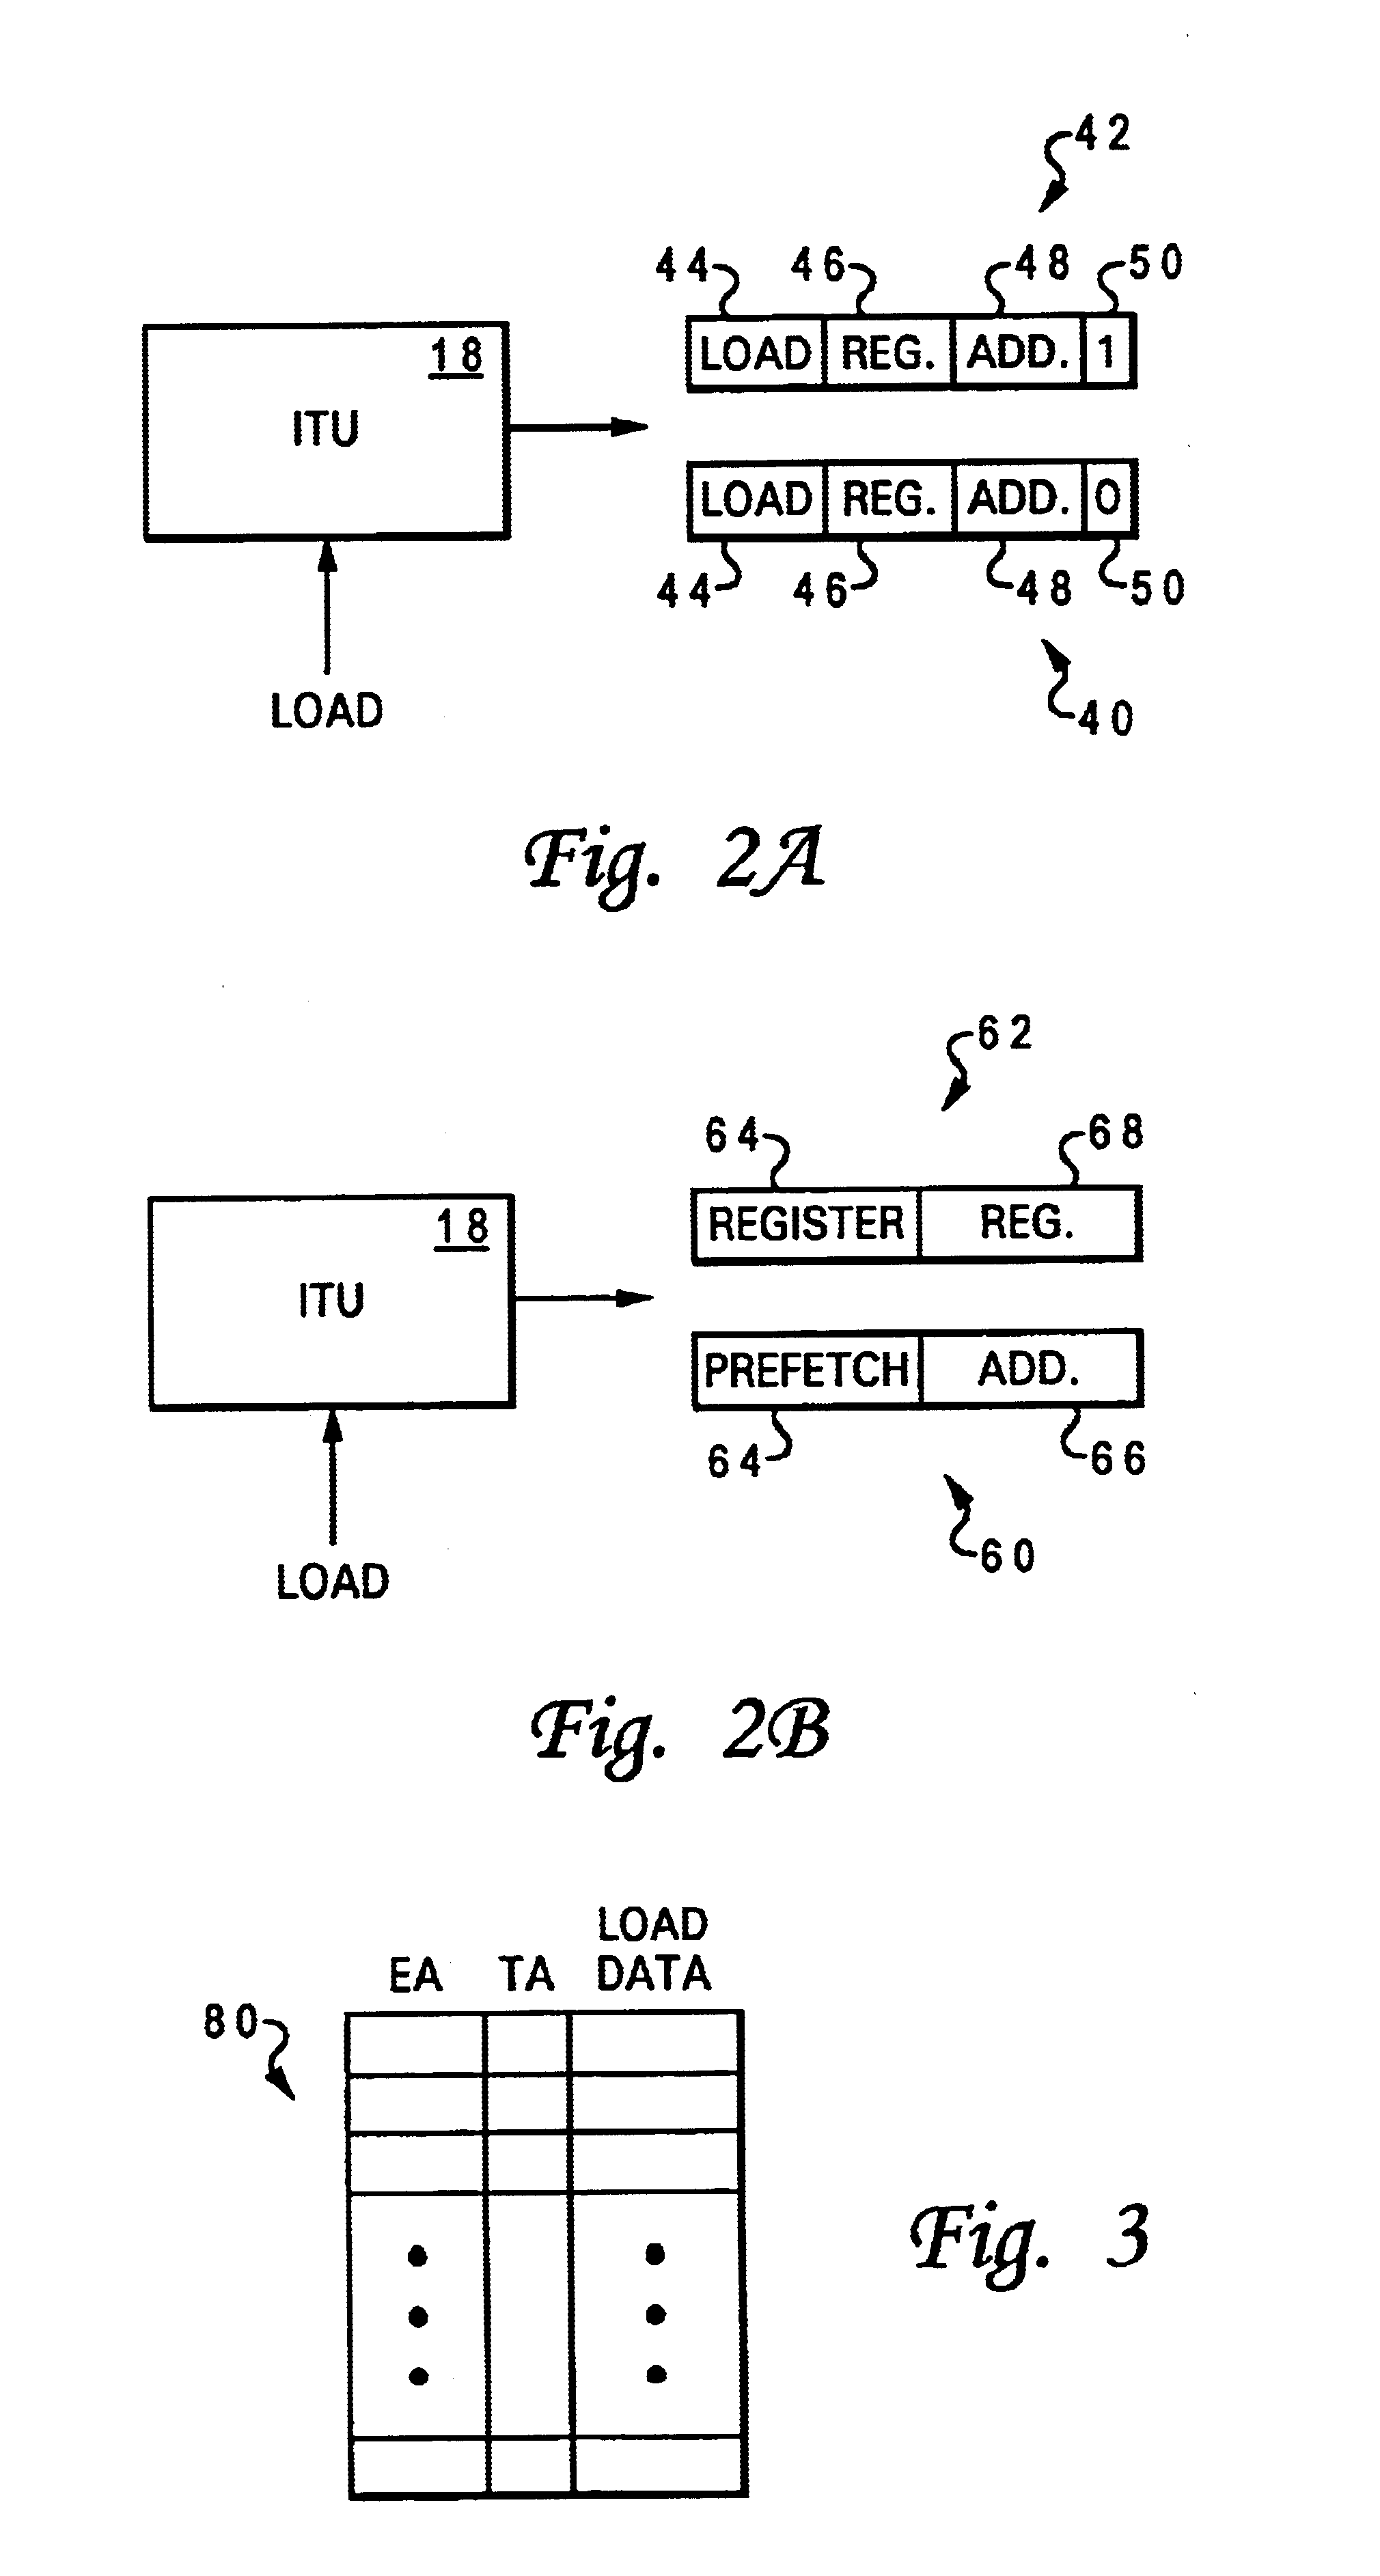 Processor and method of executing a load instruction that dynamically bifurcate a load instruction into separately executable prefetch and register operations